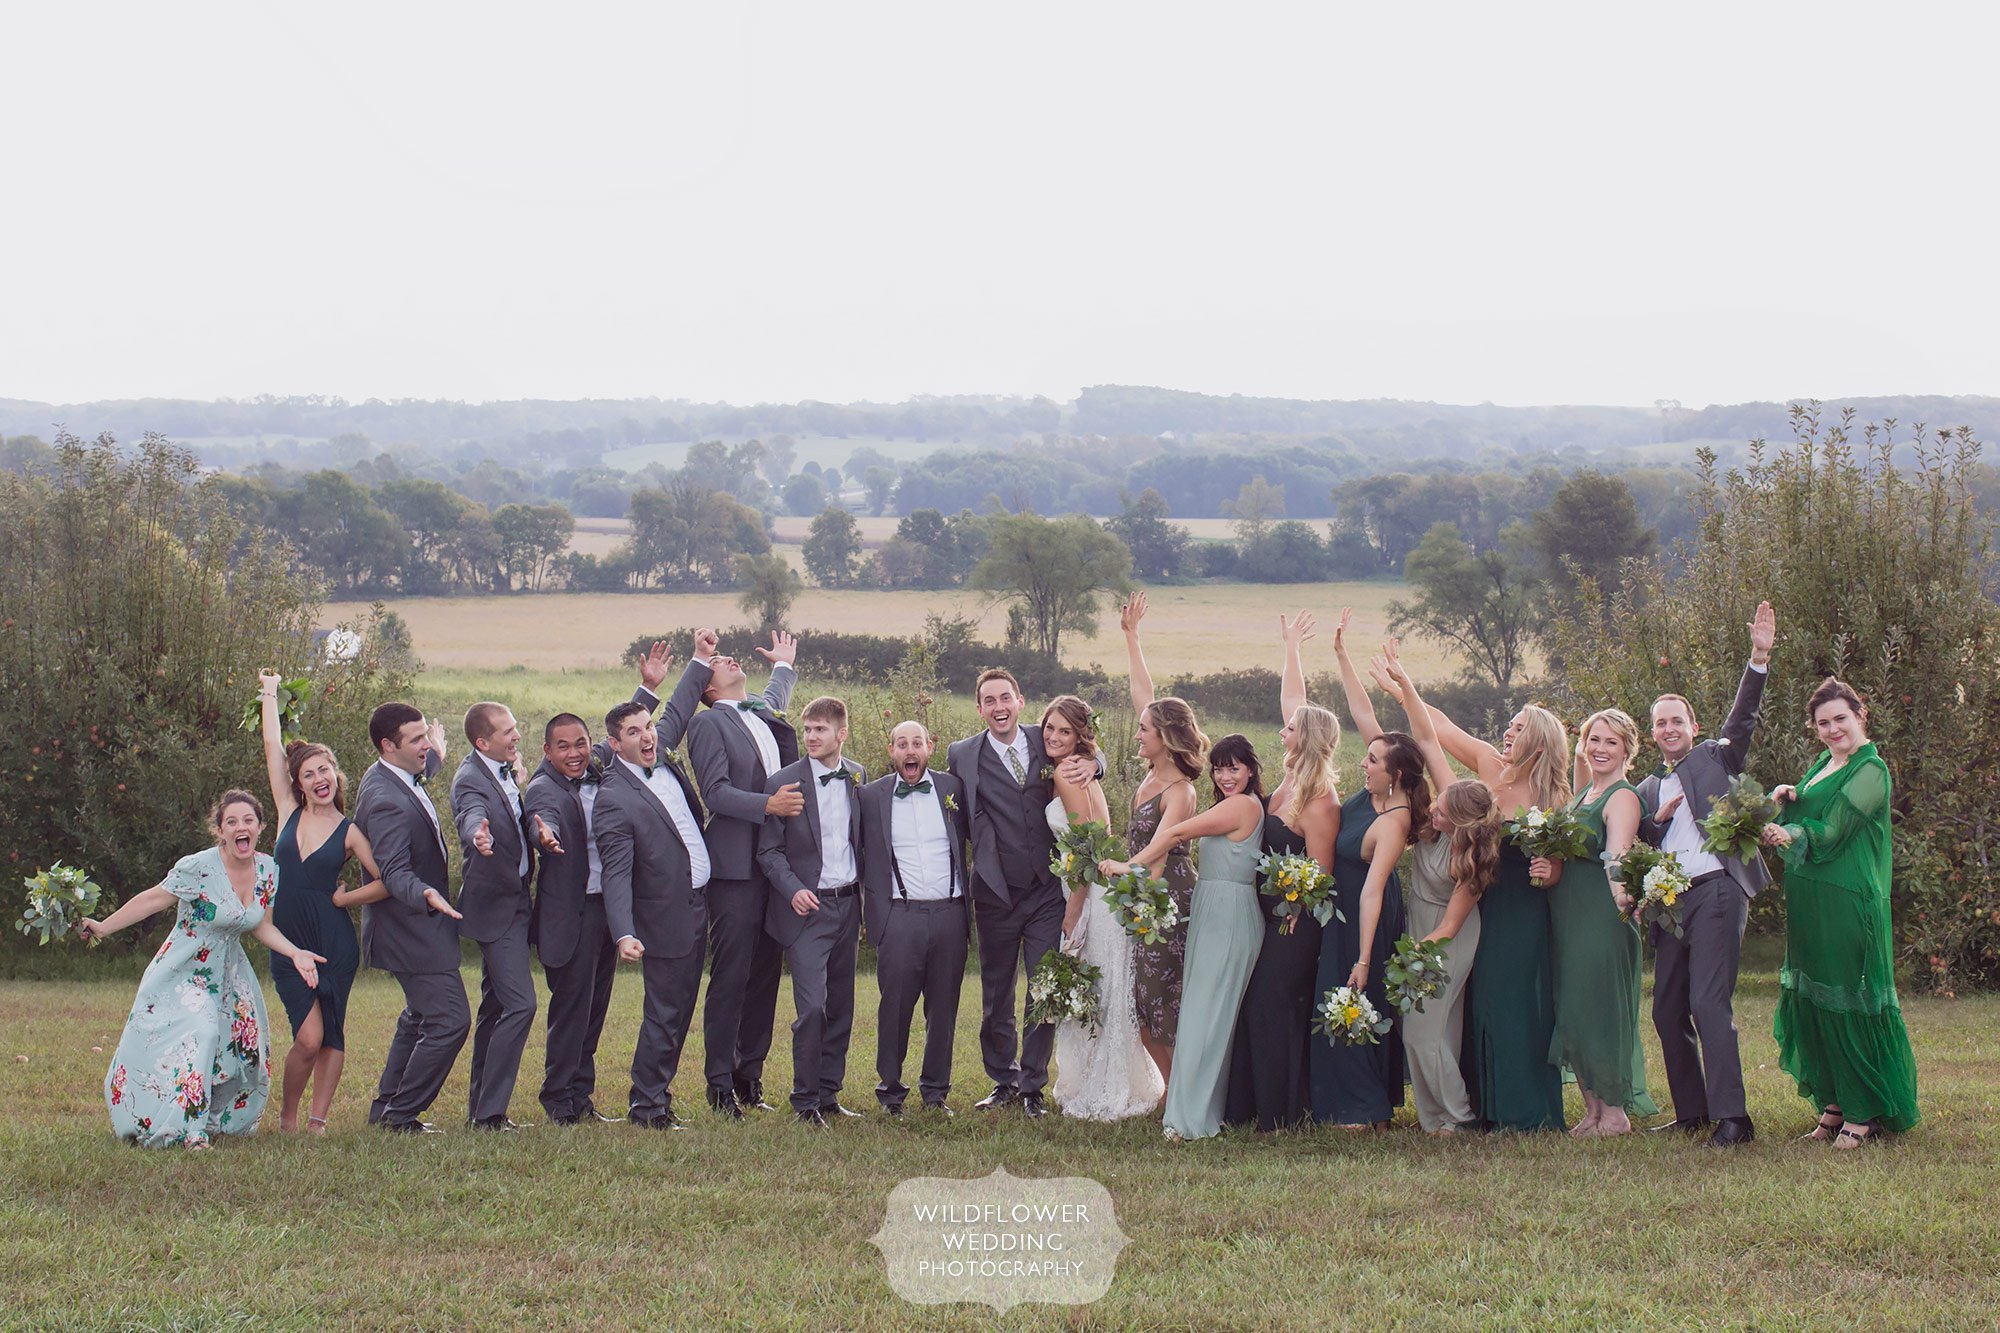 Huge wedding party with high energy pose at the Weston Red Barn Farm.